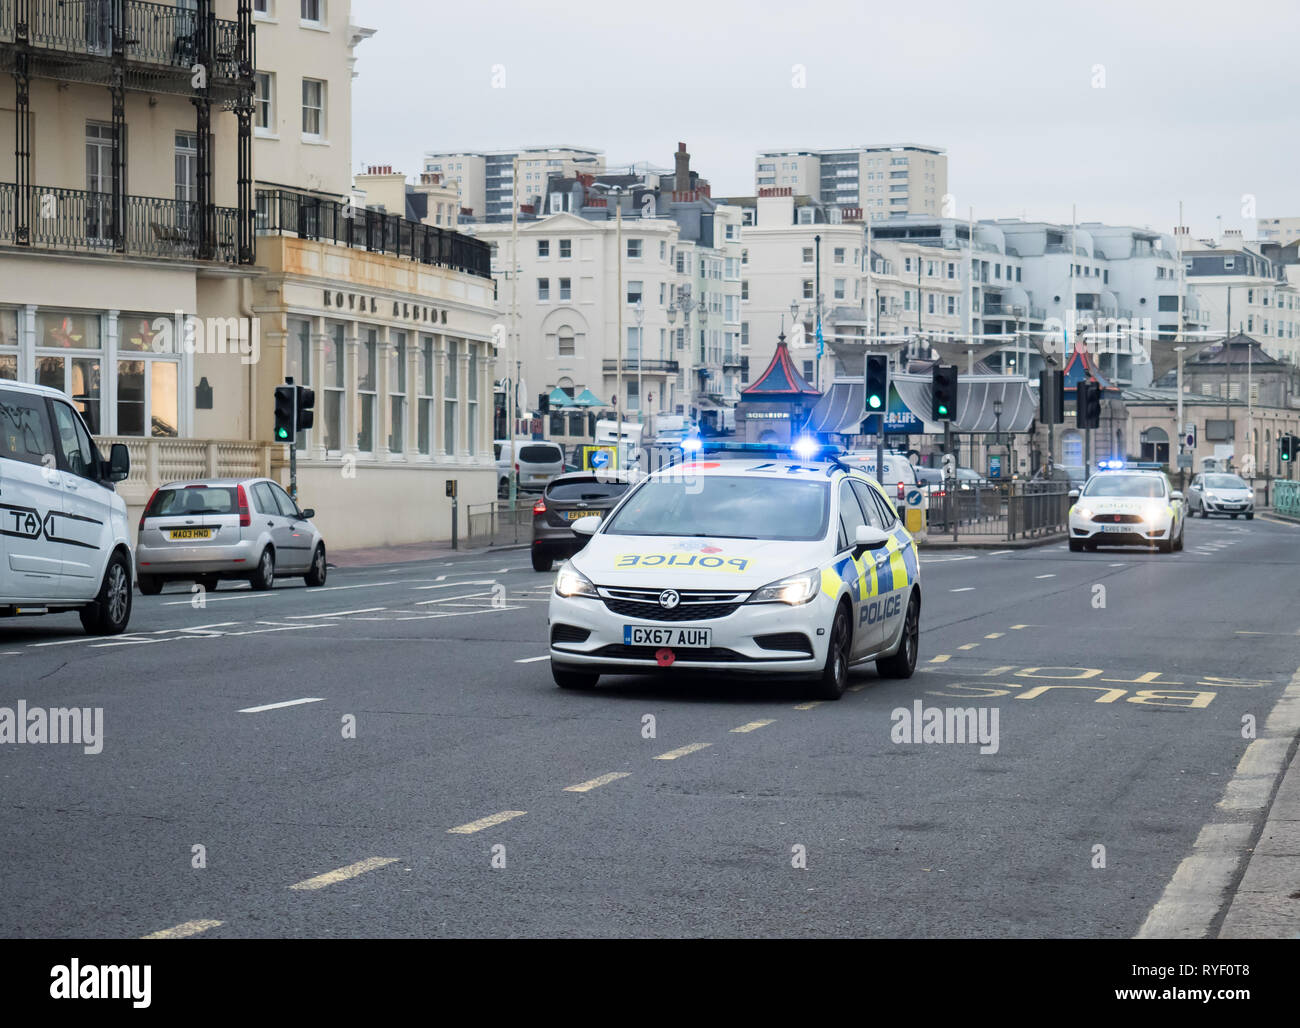 Two Police Vehicles responding to emergency call along King's Road, Brighton seafront. Stock Photo